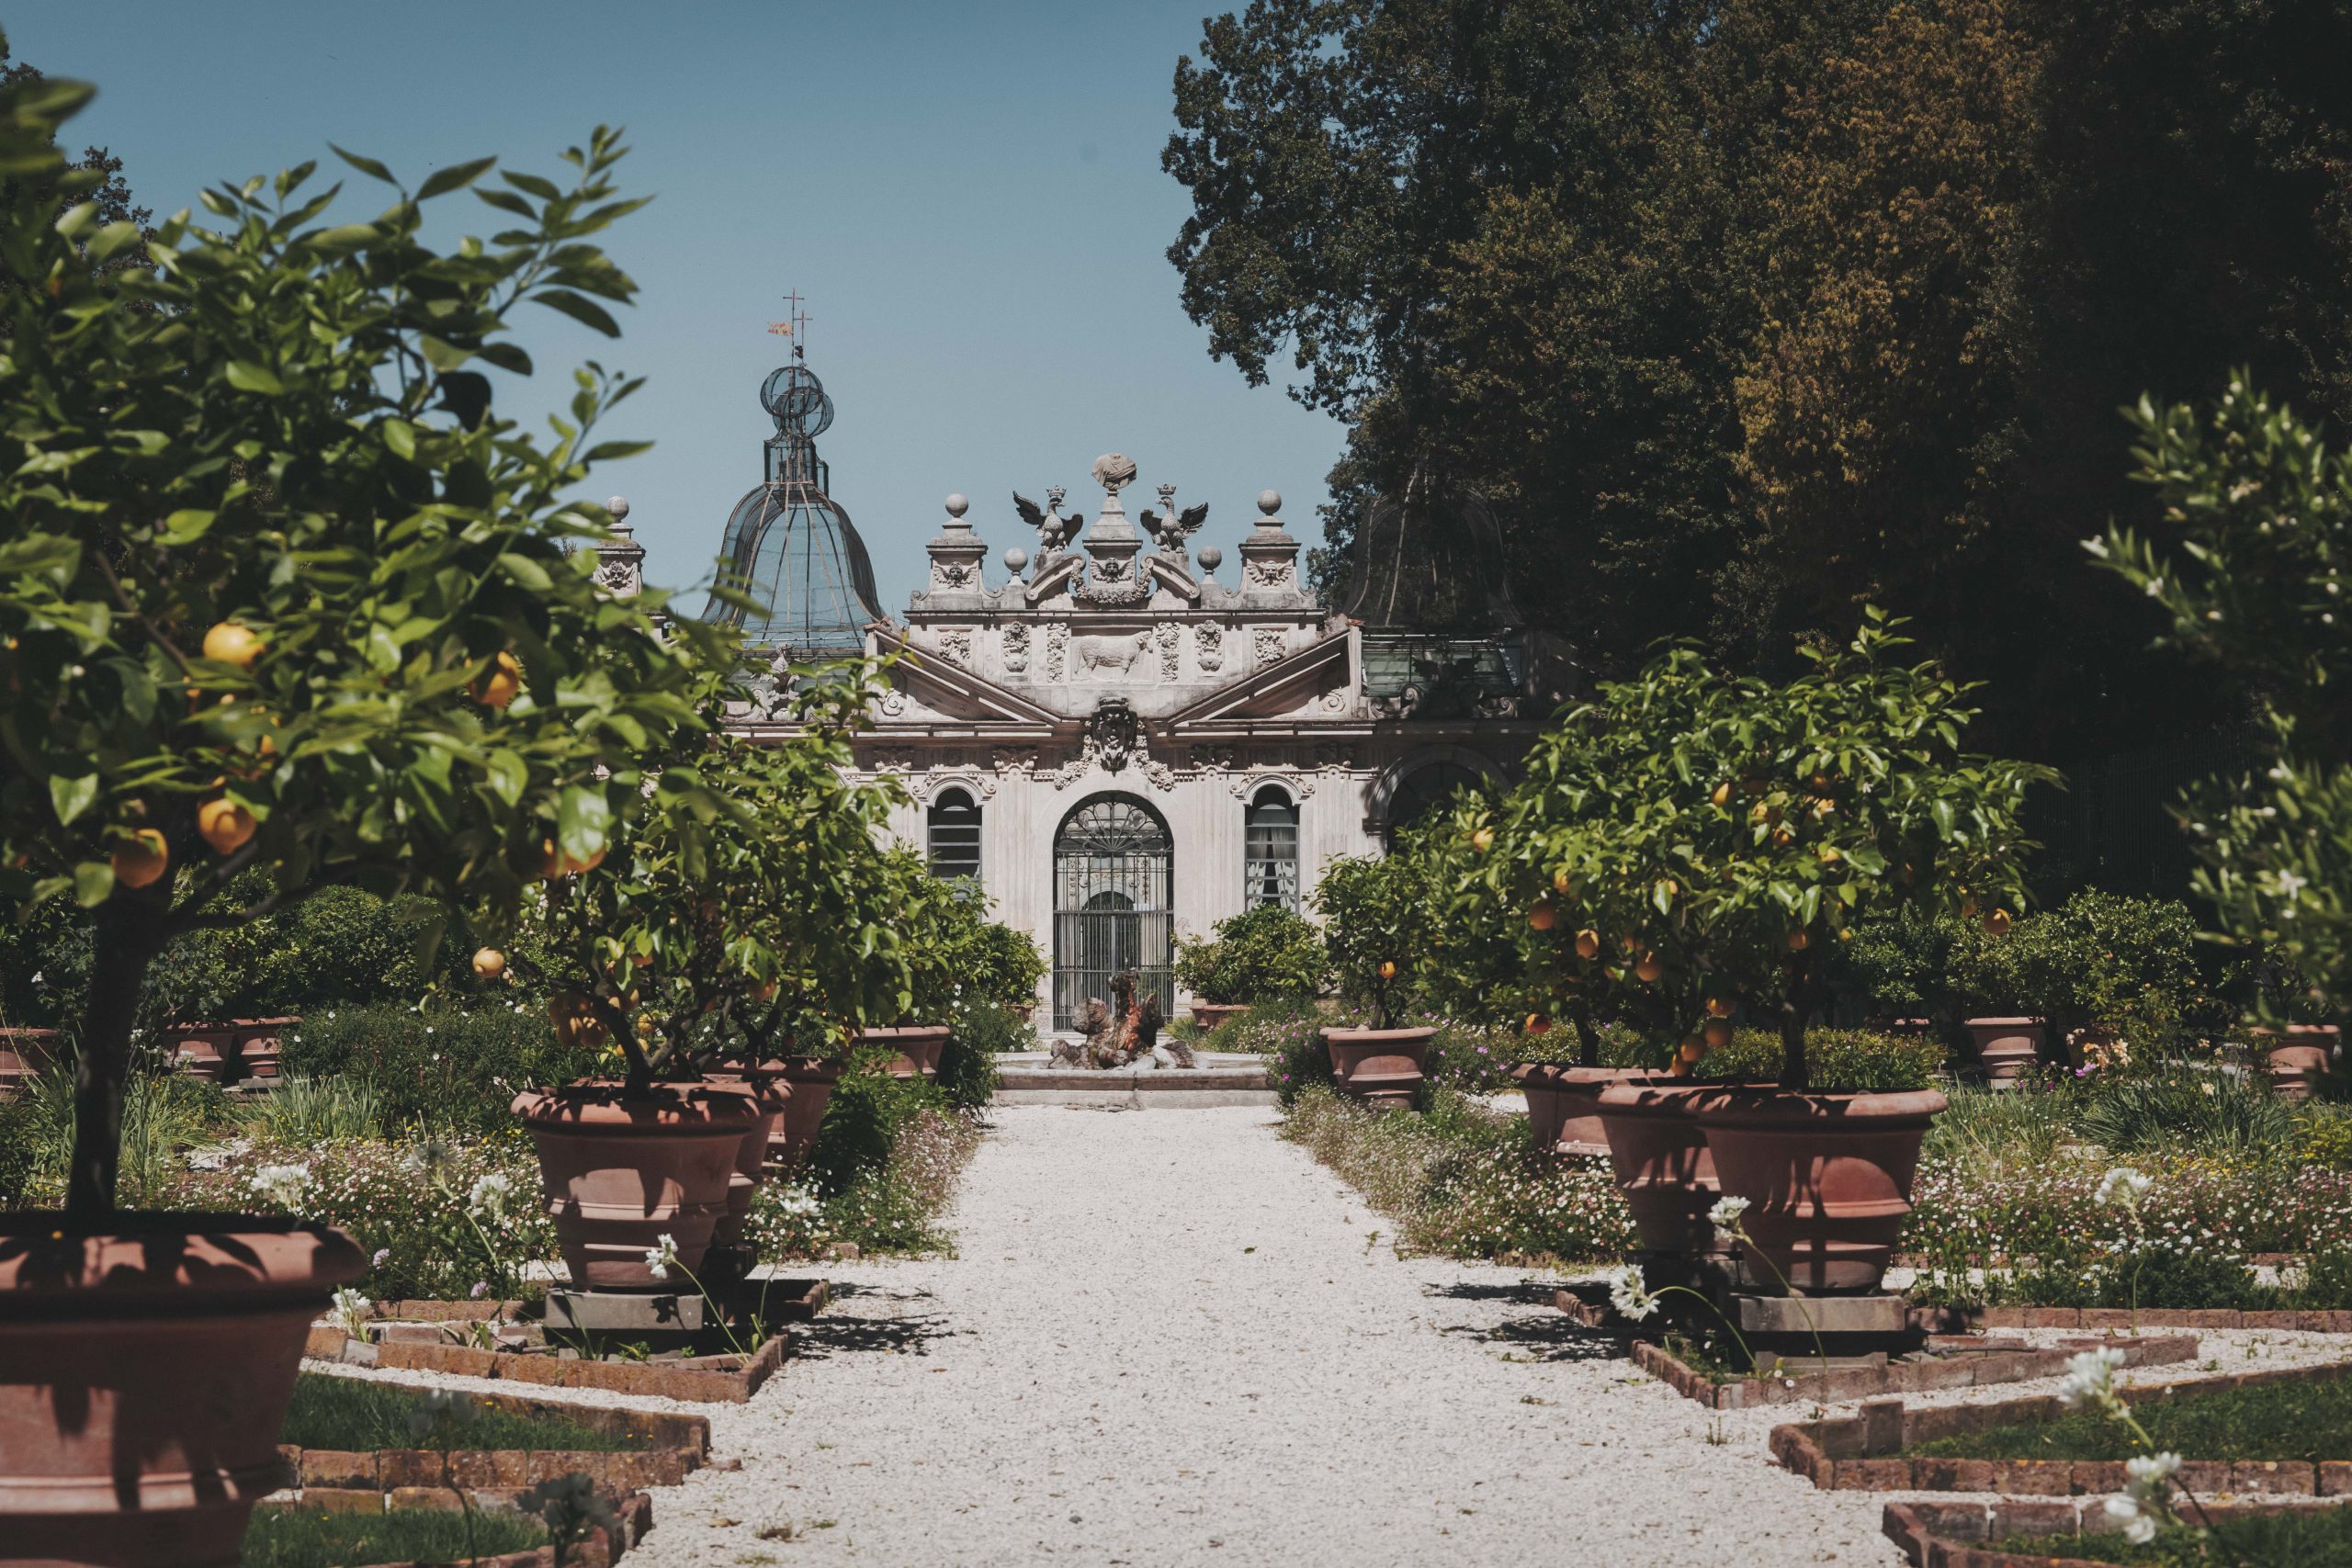 EXTRAORDINARY OPENINGS OF THE SECRET GARDENS OF SCIPIONE BORGHESE ARE BACK!